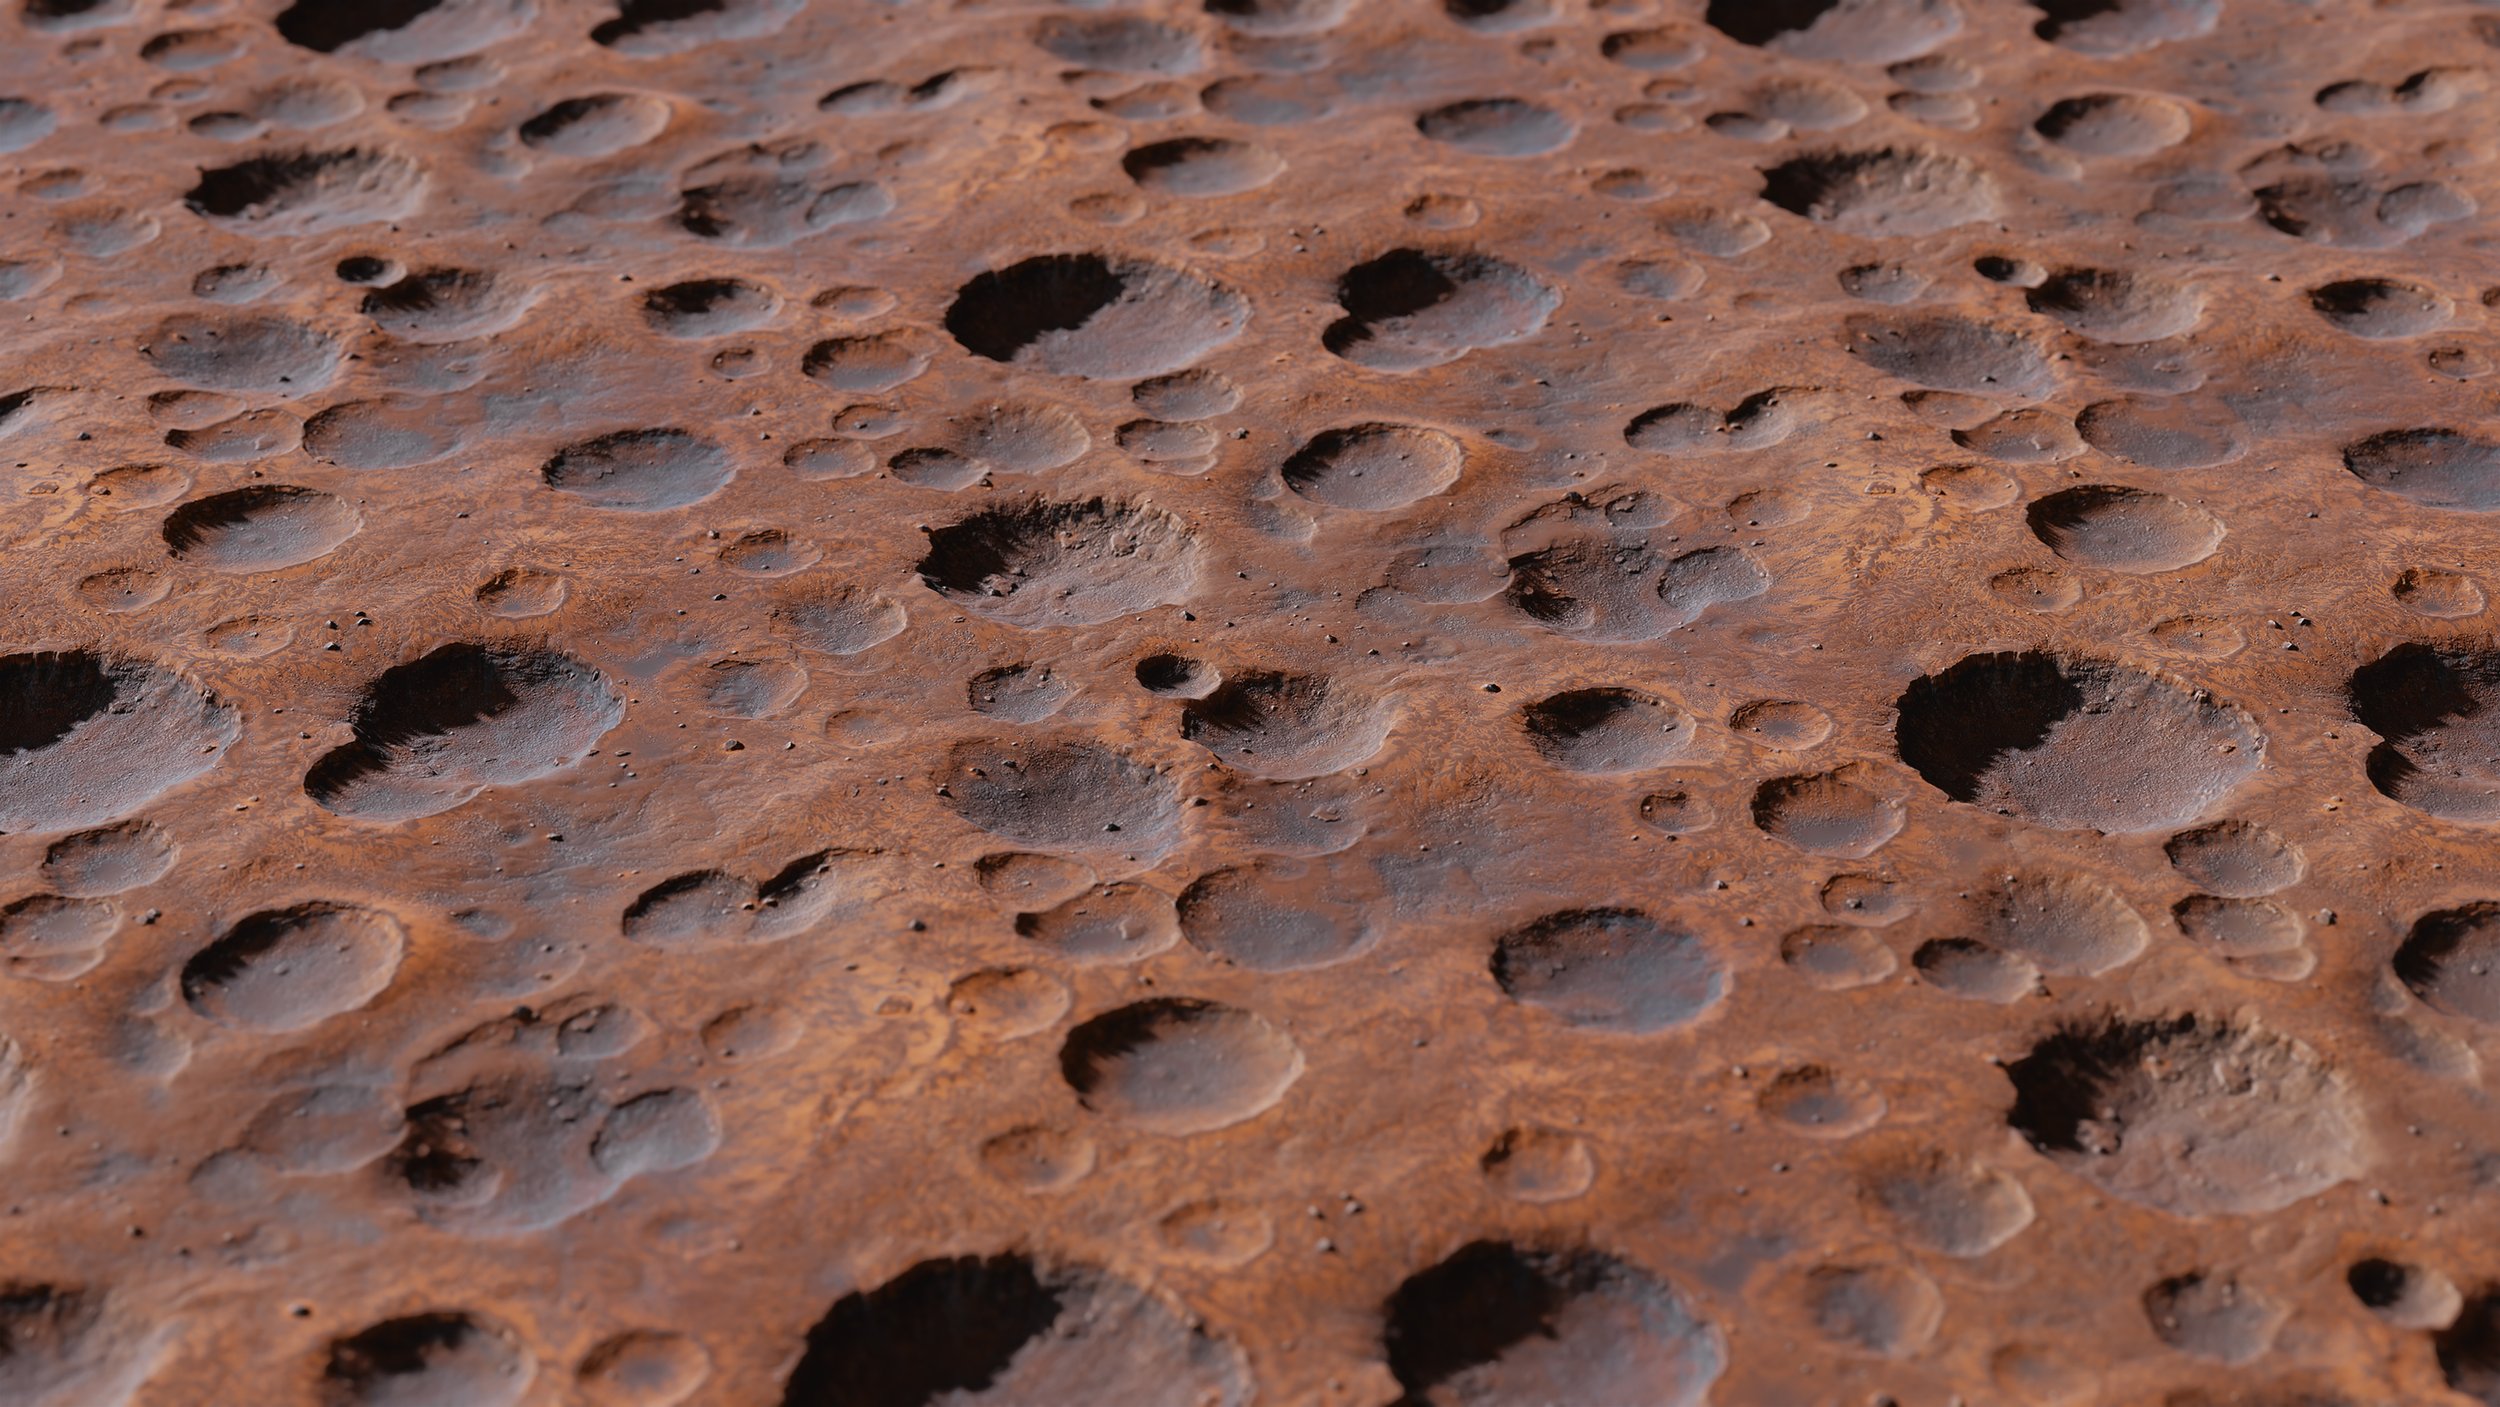 Small_craters_tileMesh_RED.jpg